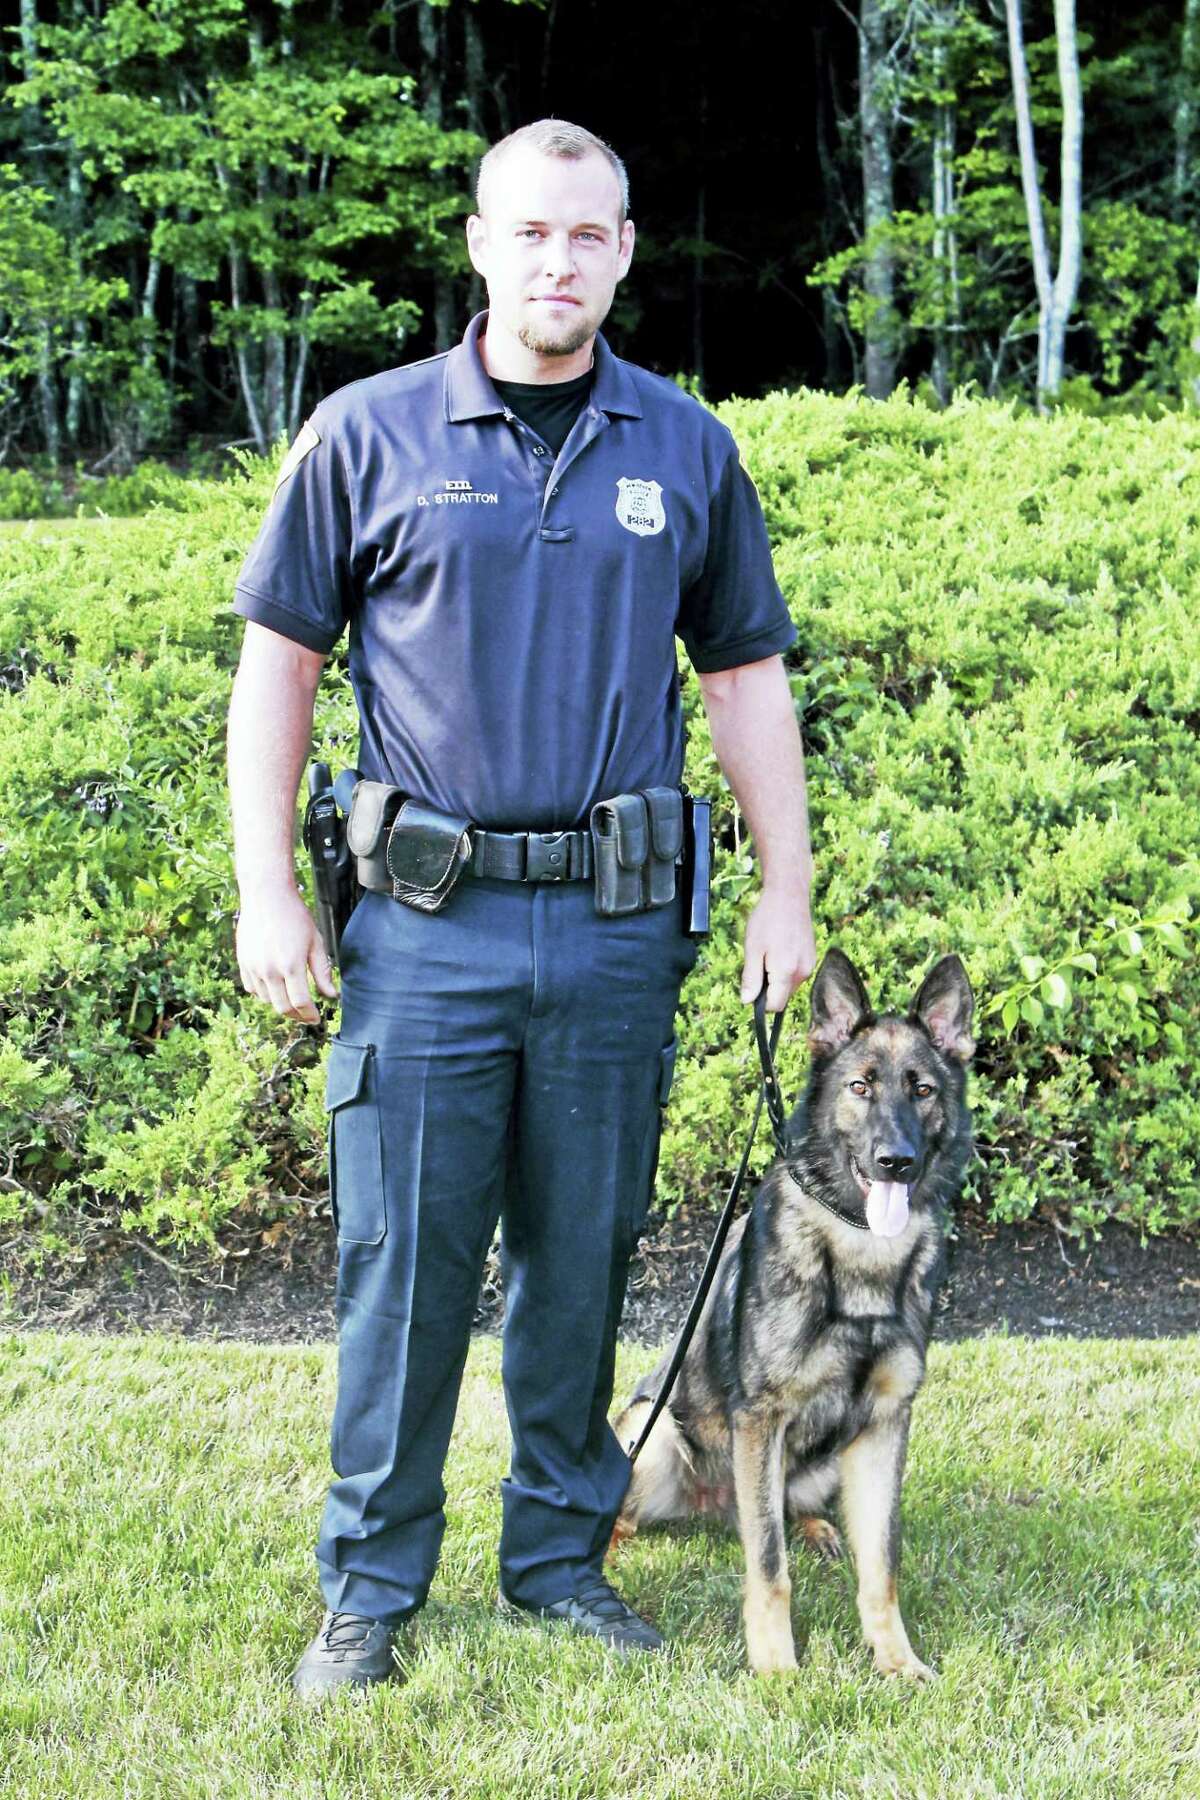 New Haven police Officer Dave Stratton and his police dog Atos, one of the department’s patrol division canines.